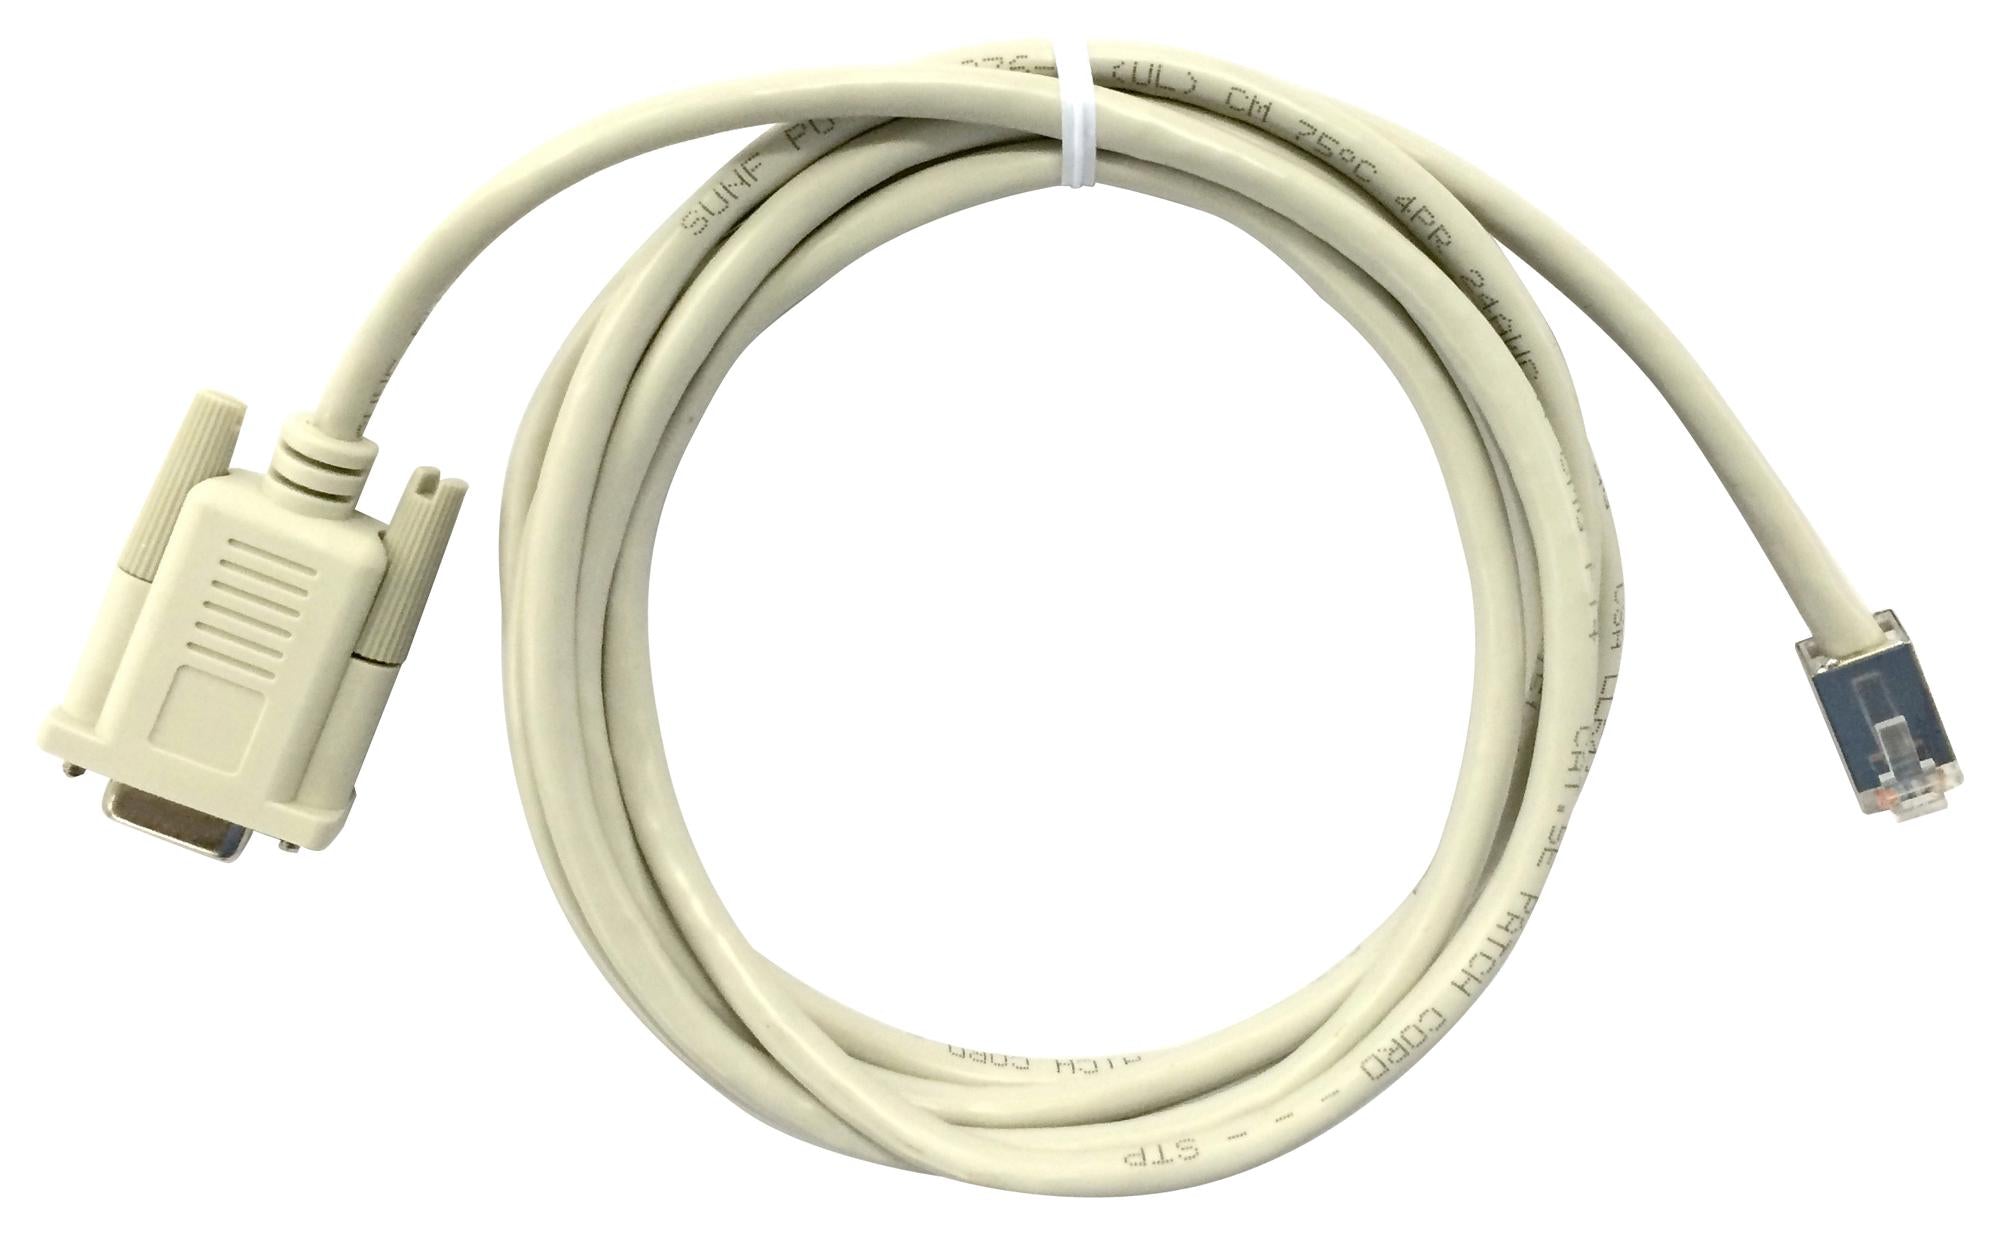 S8BW-C01 COMMUNICATION CABLE, RS-232C PORT, UPS OMRON